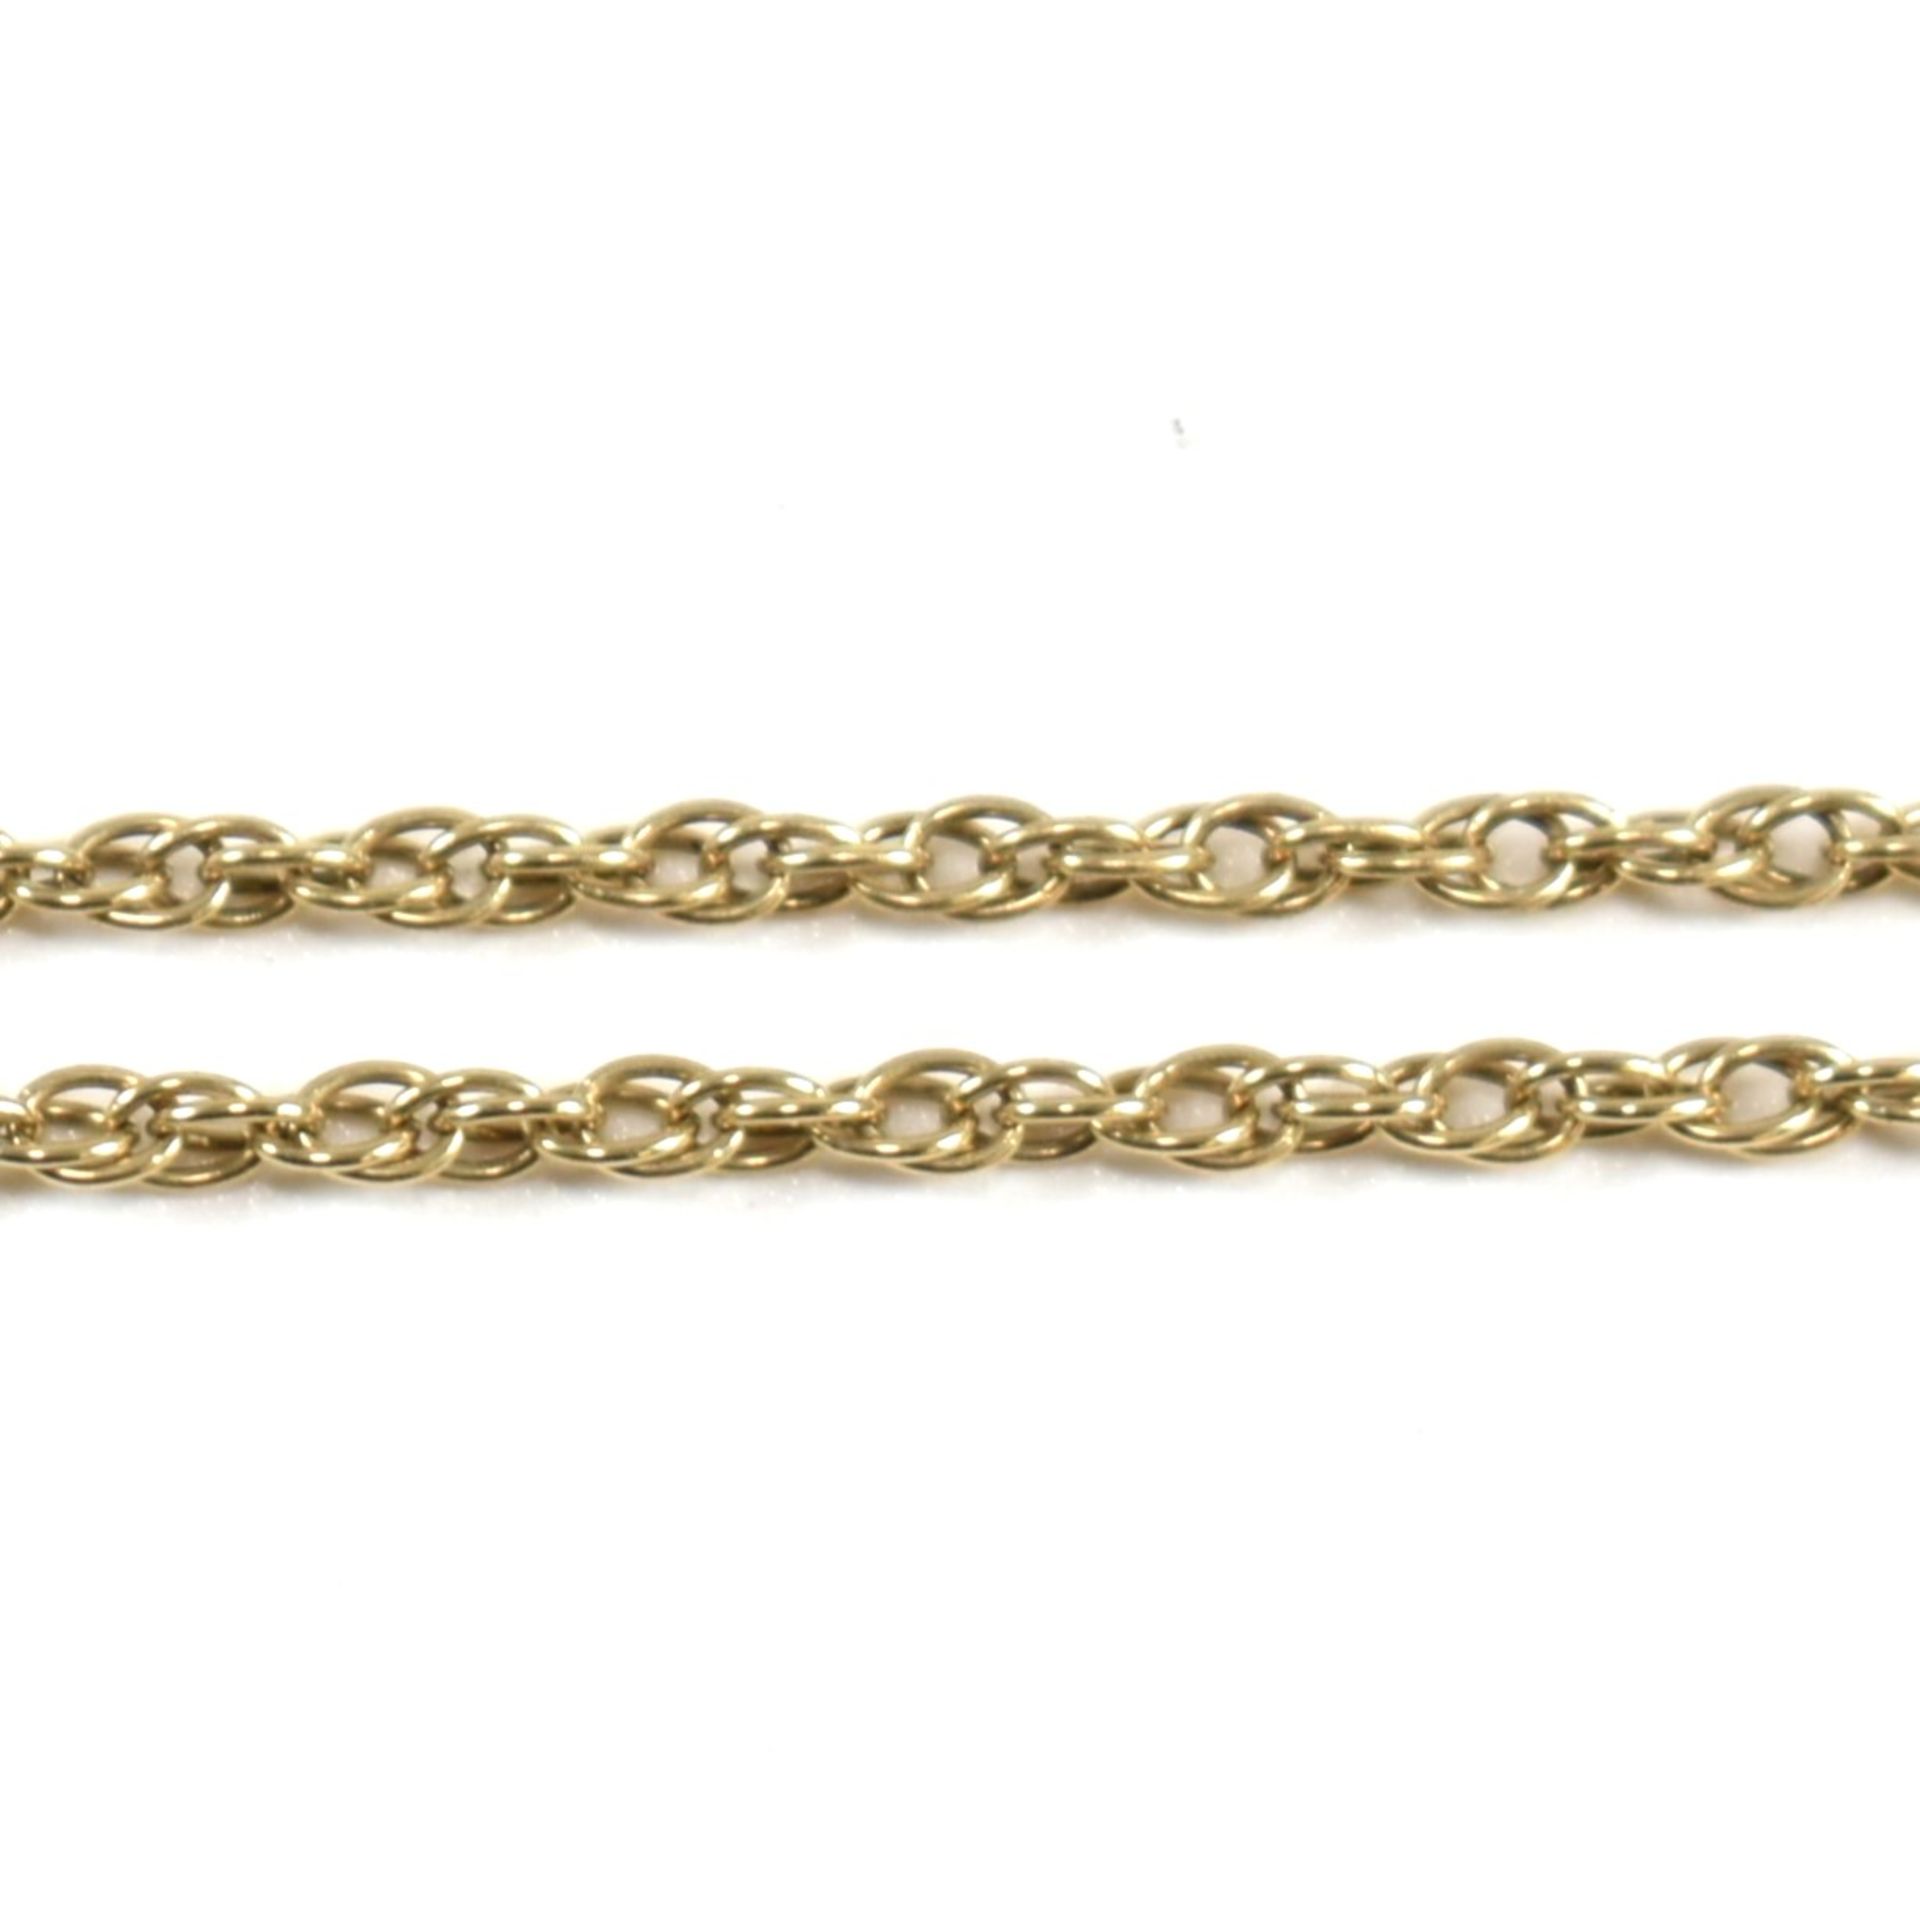 HALLMARKED 9CT GOLD T-BAR NECKLACE - Image 3 of 5